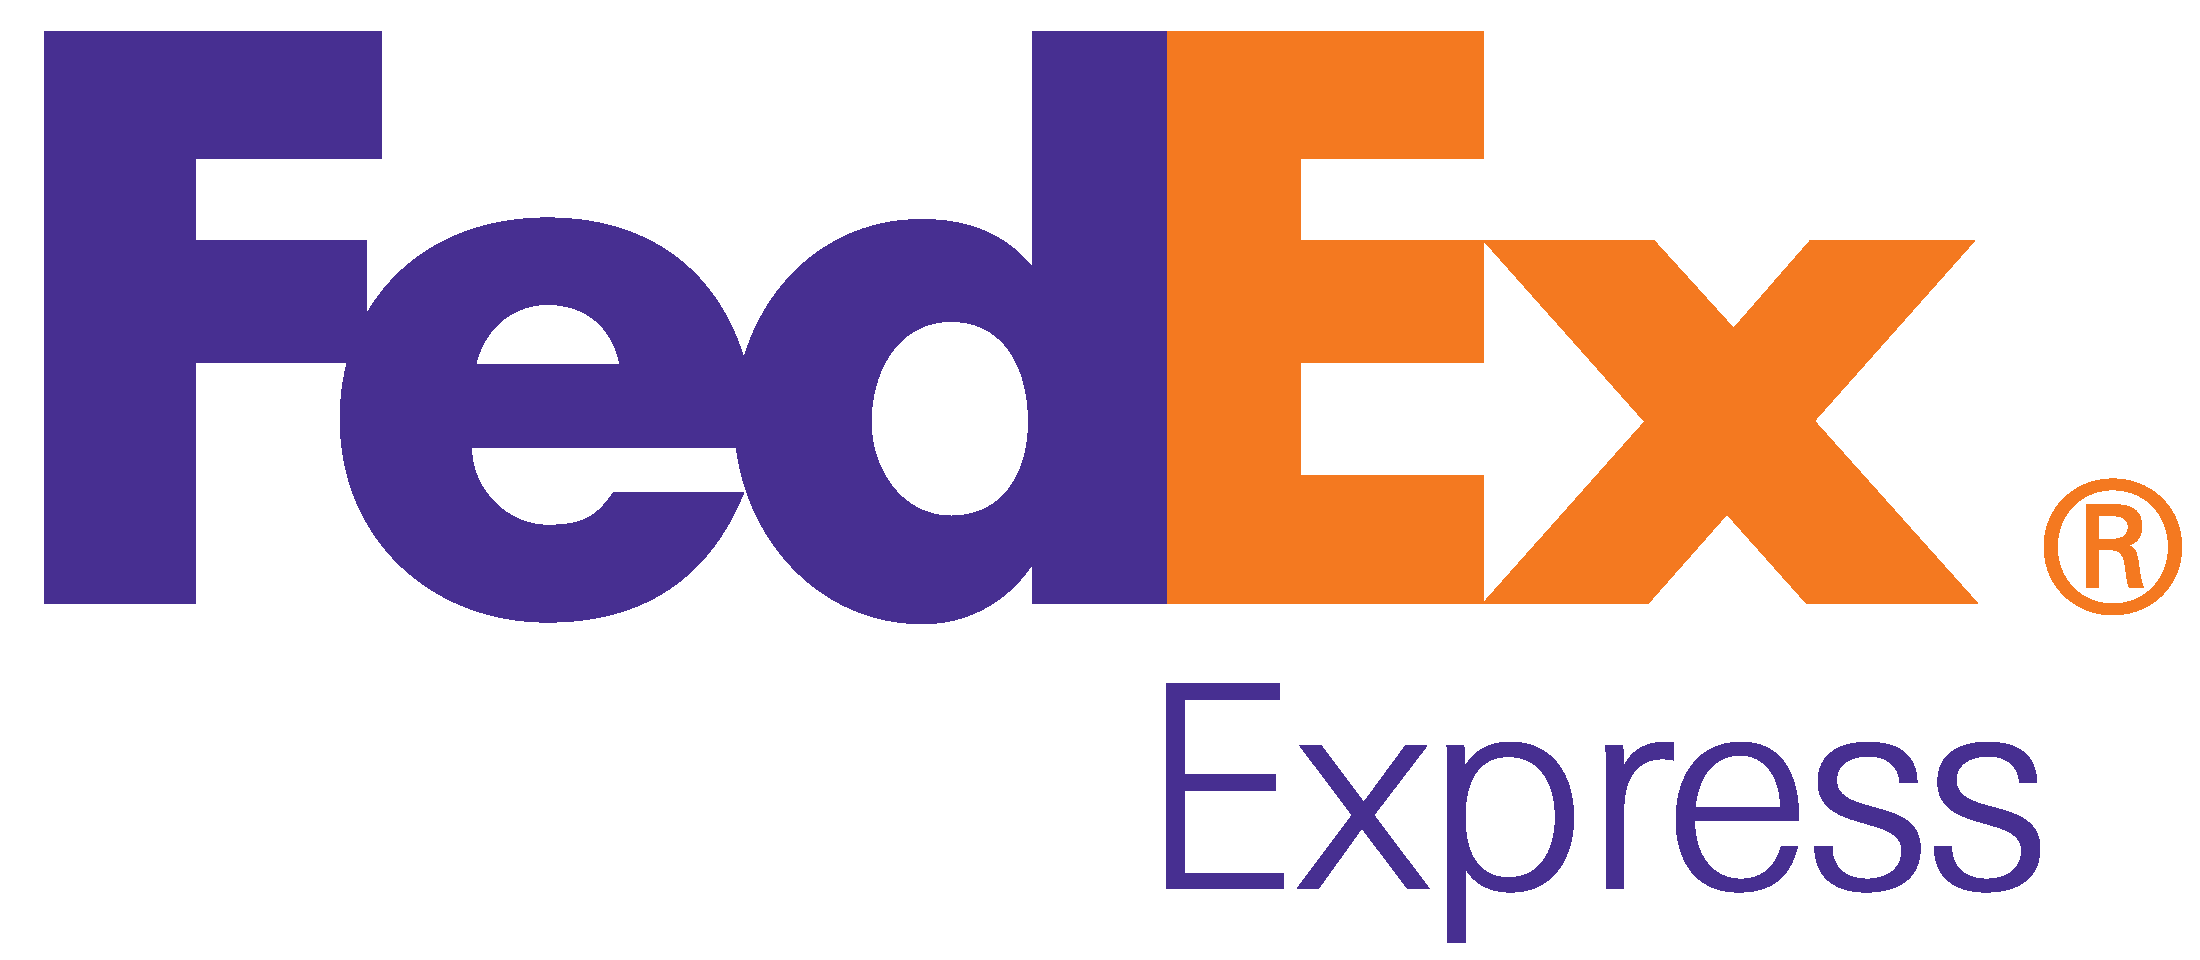 White FedEx Logo - The Fedex logo is one of the most successful logos. At least for me